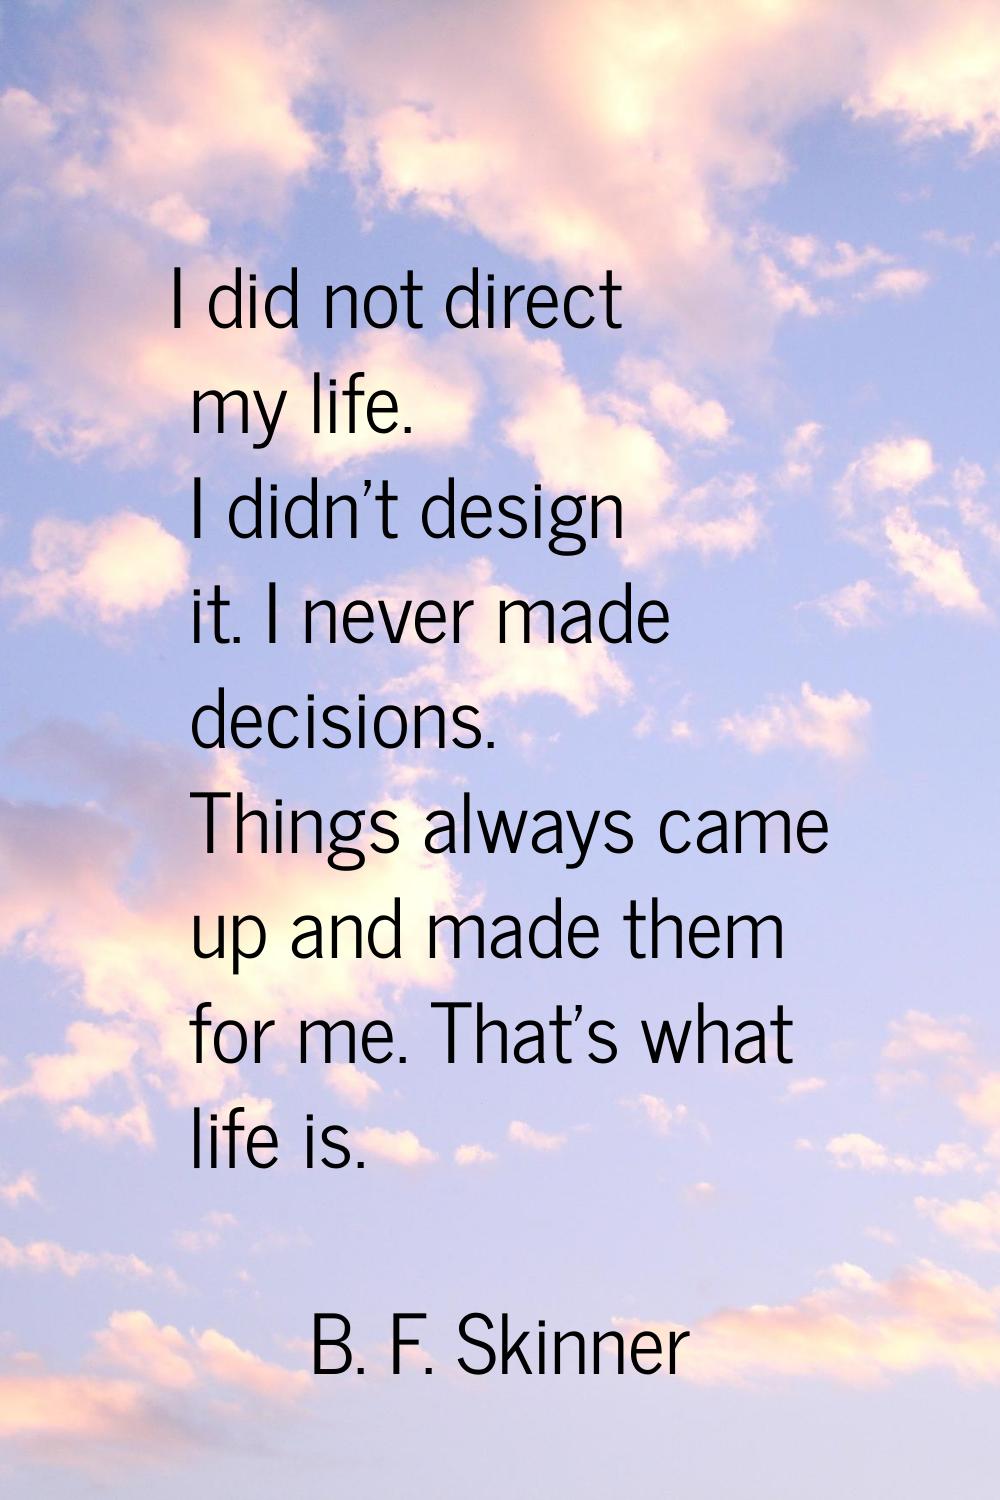 I did not direct my life. I didn't design it. I never made decisions. Things always came up and mad